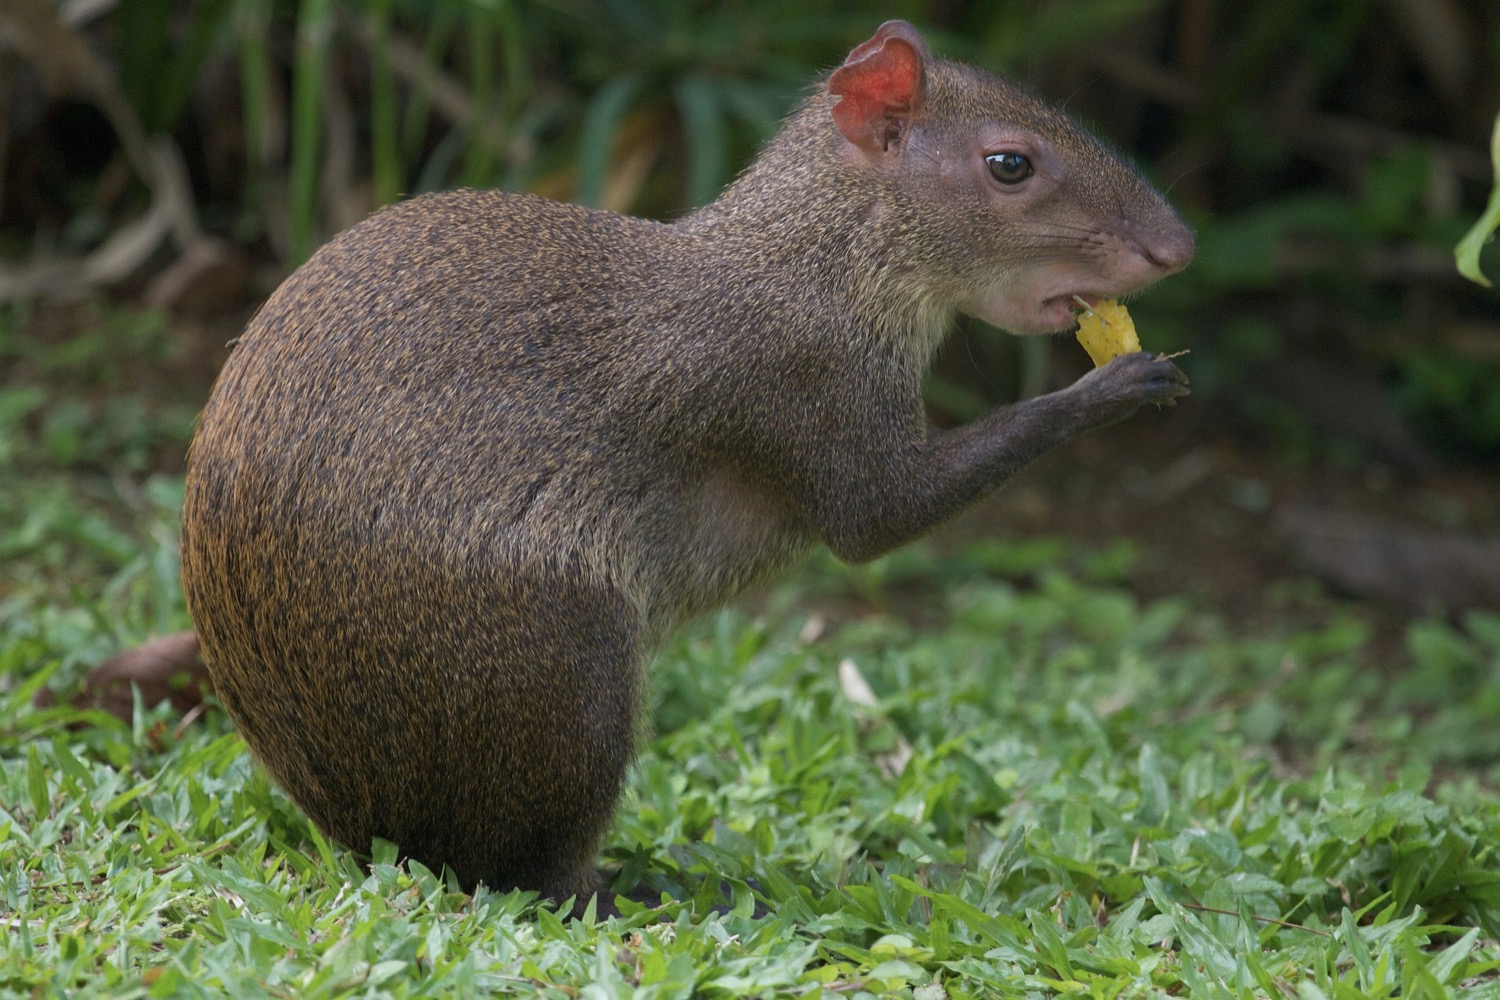 This is an *Agouti*, a small rodent native to Middle and South America. It’s also the name of a [web driver that framework in Go](https://agouti.org/) that I used to do website scraping. Image Source: [wikipedia](https://en.wikipedia.org/wiki/Agouti)